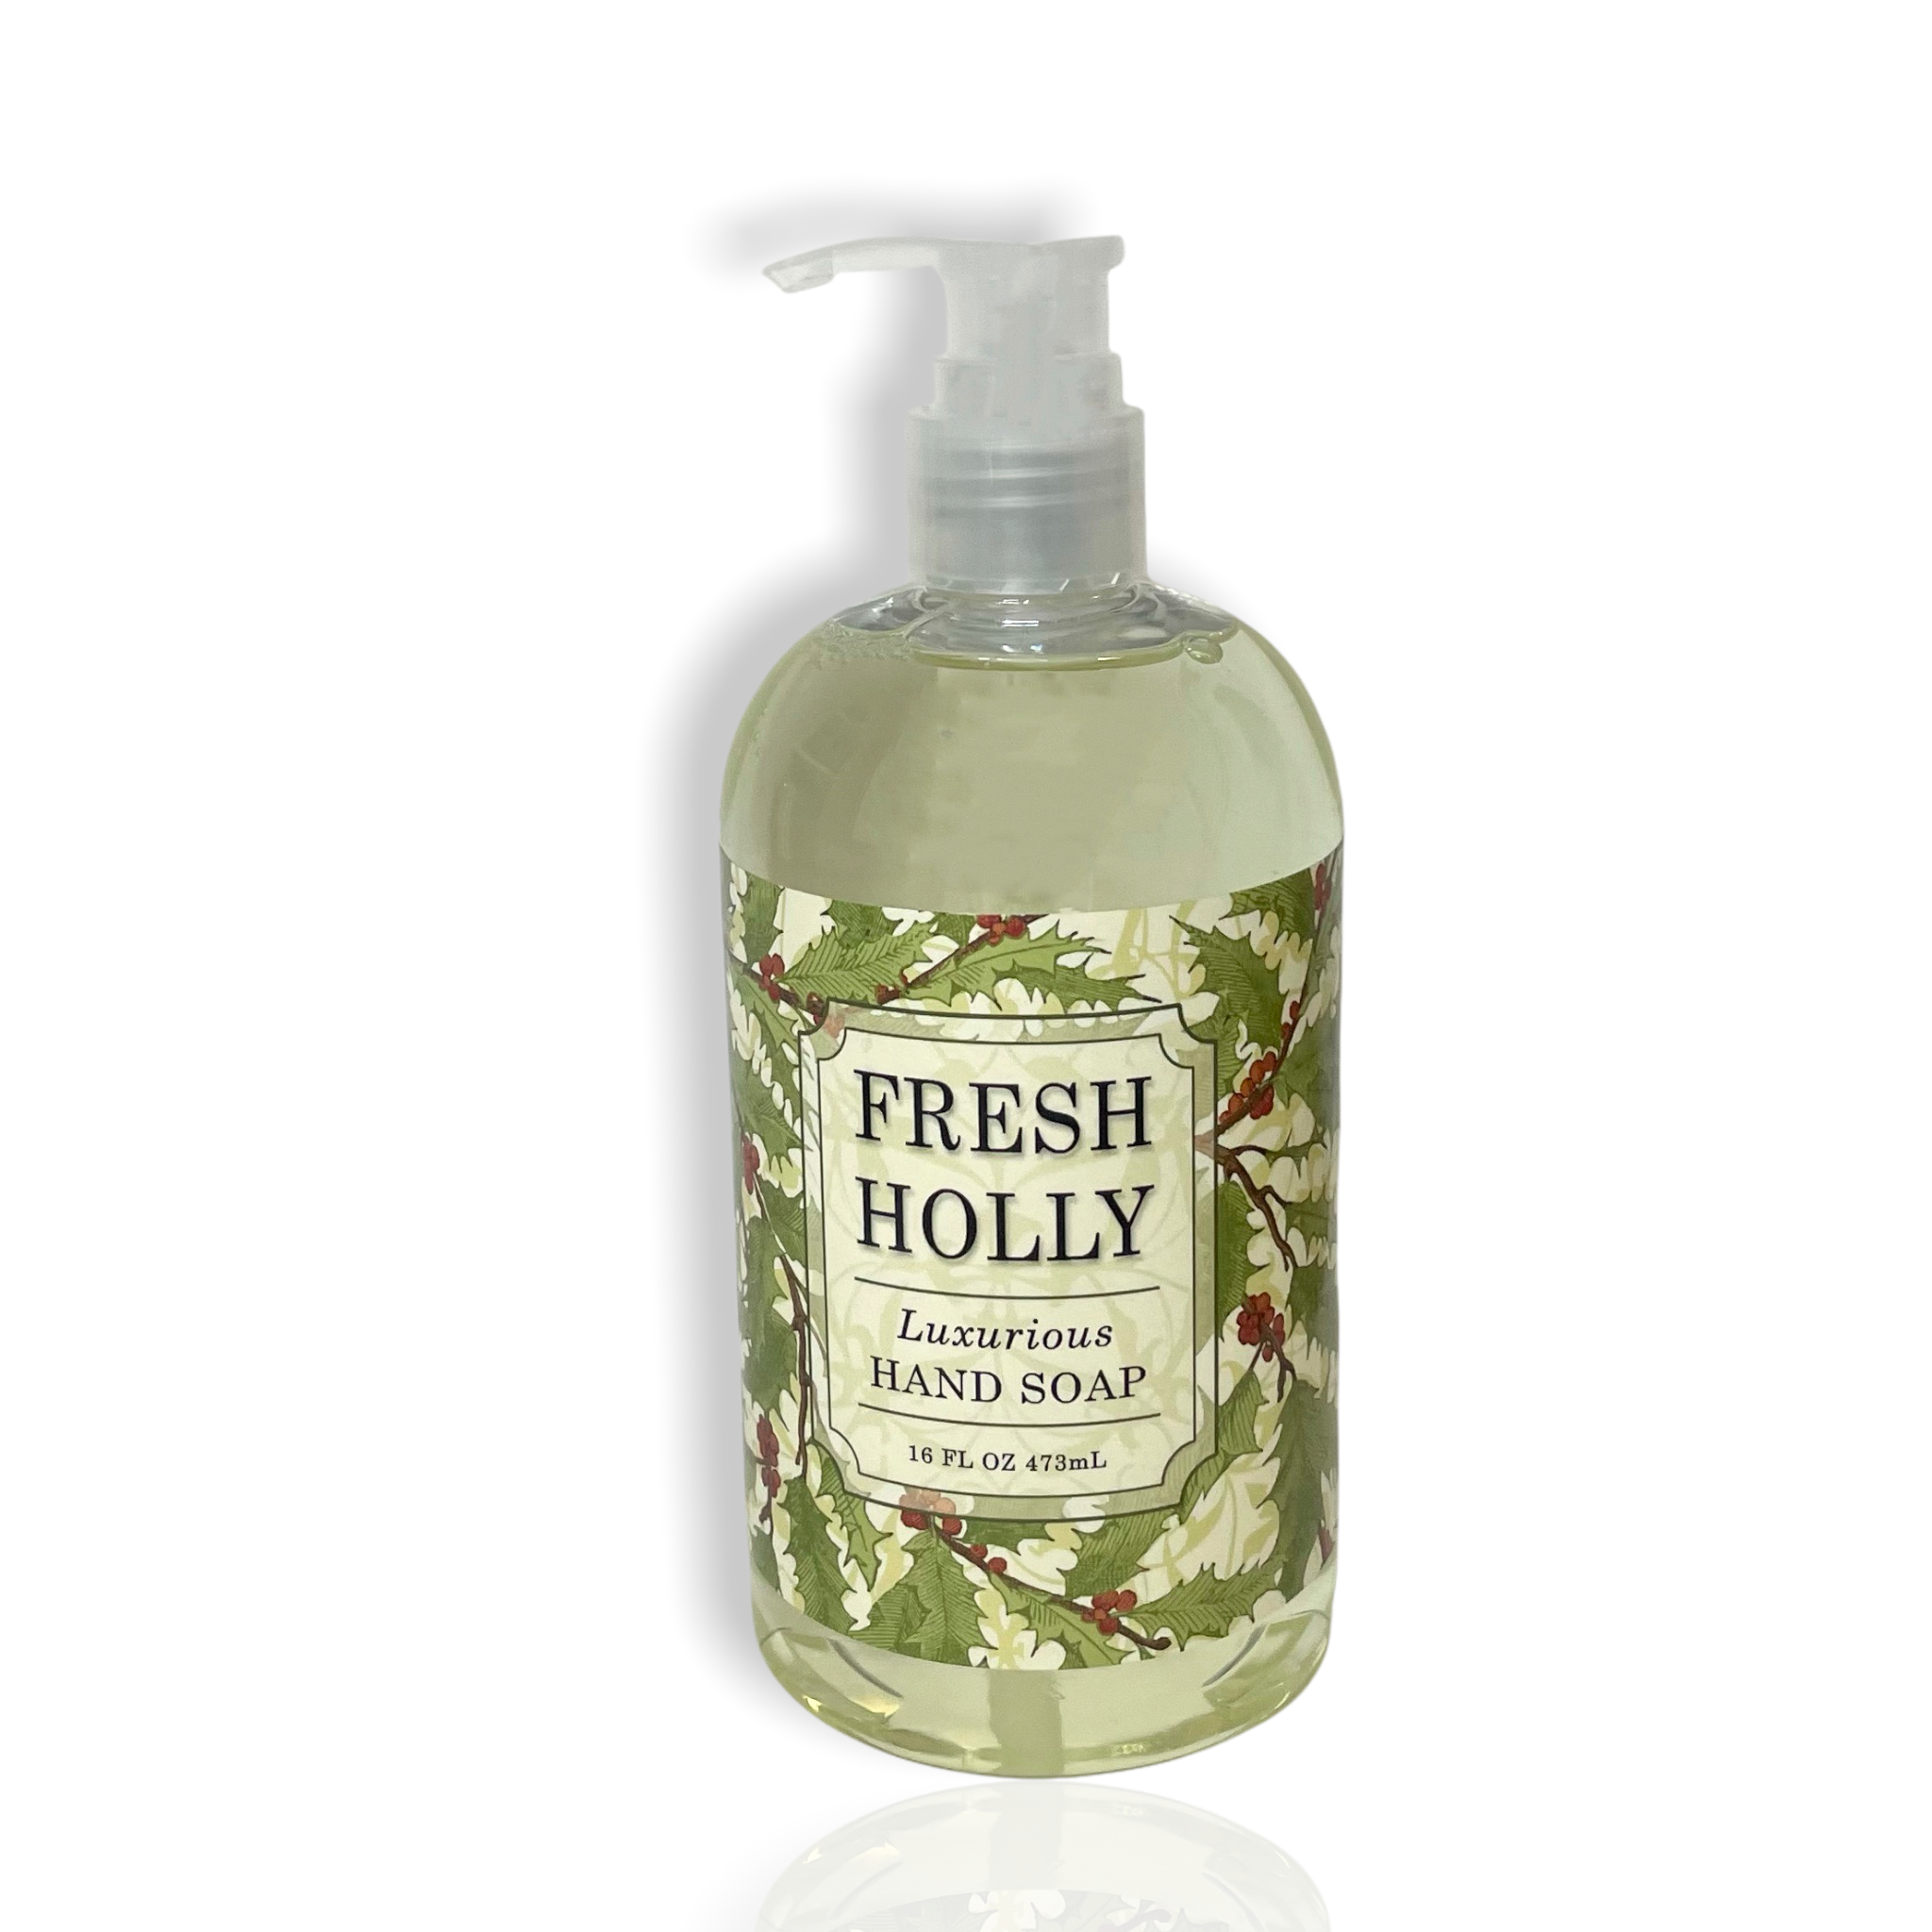 Greenwich Bay Trading Company Fresh Holly Collection Liquid Hand Soap